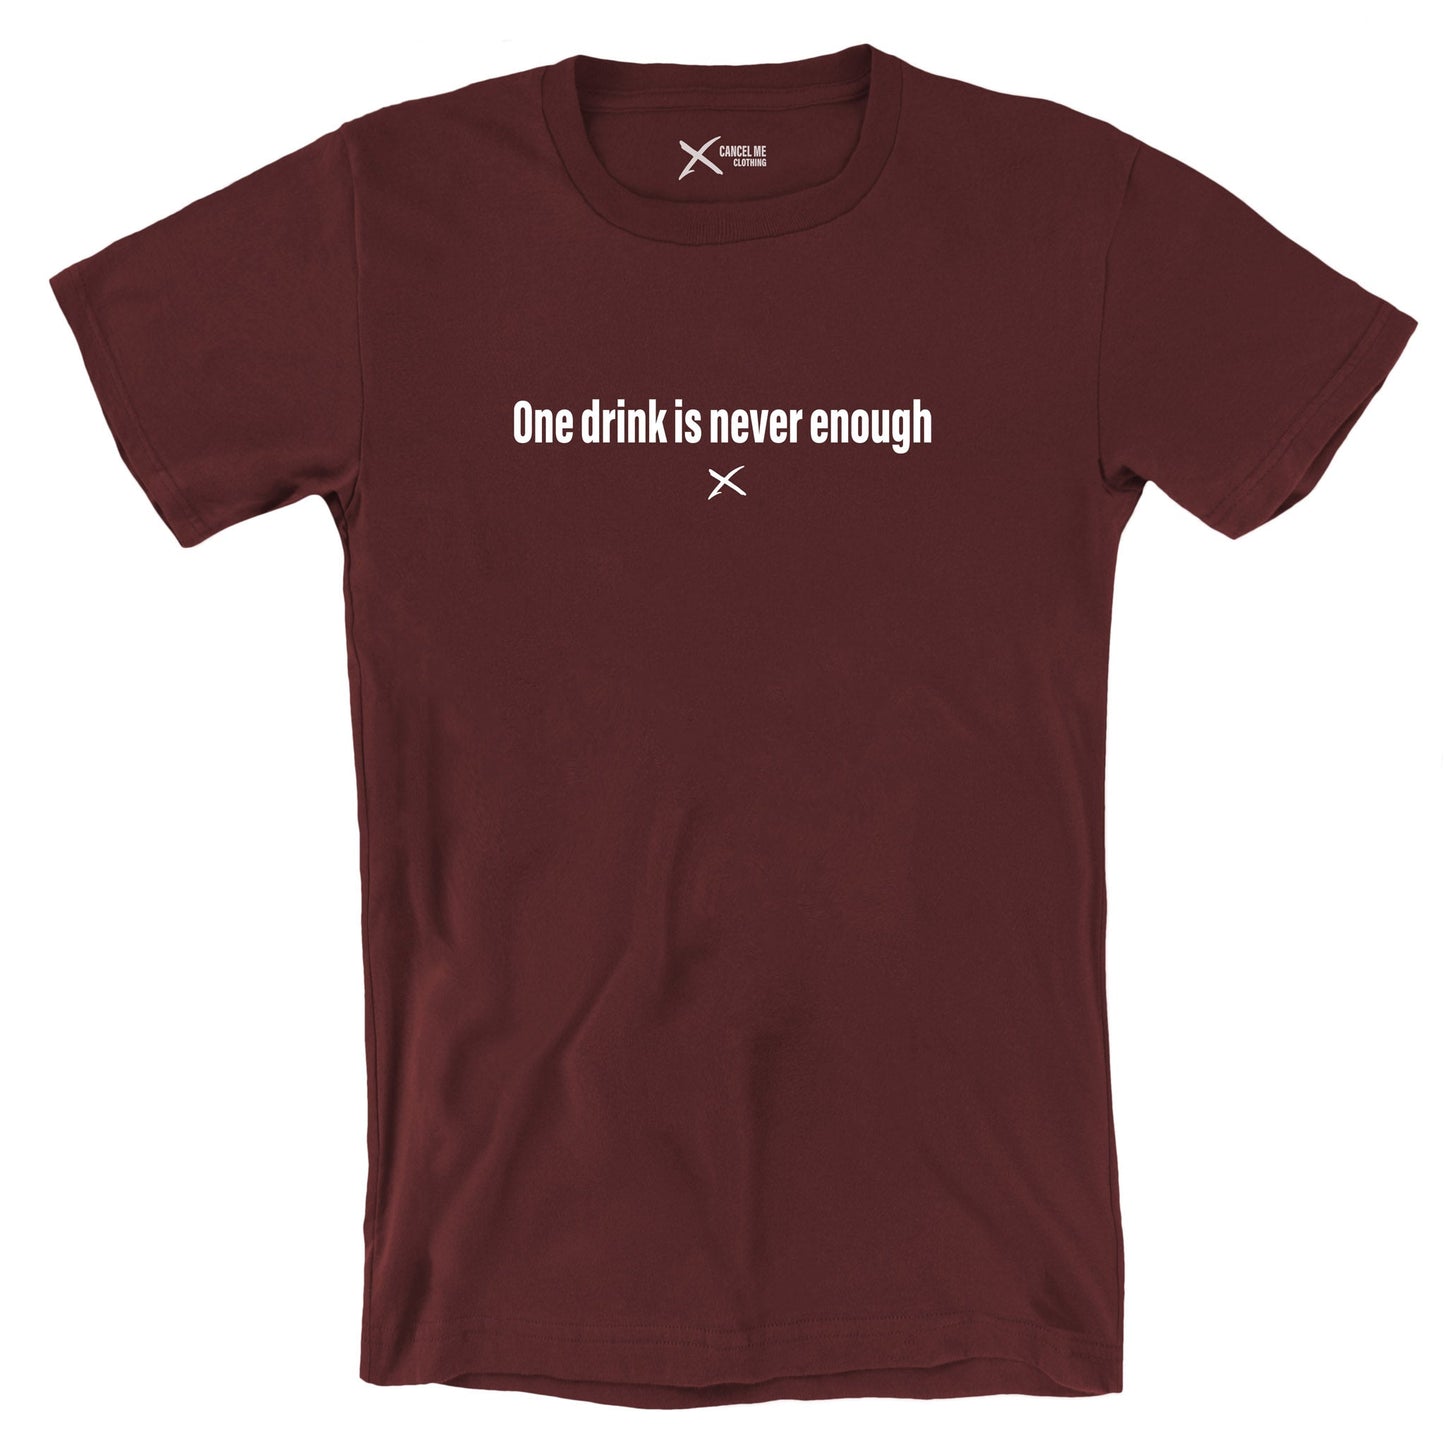 One drink is never enough - Shirt